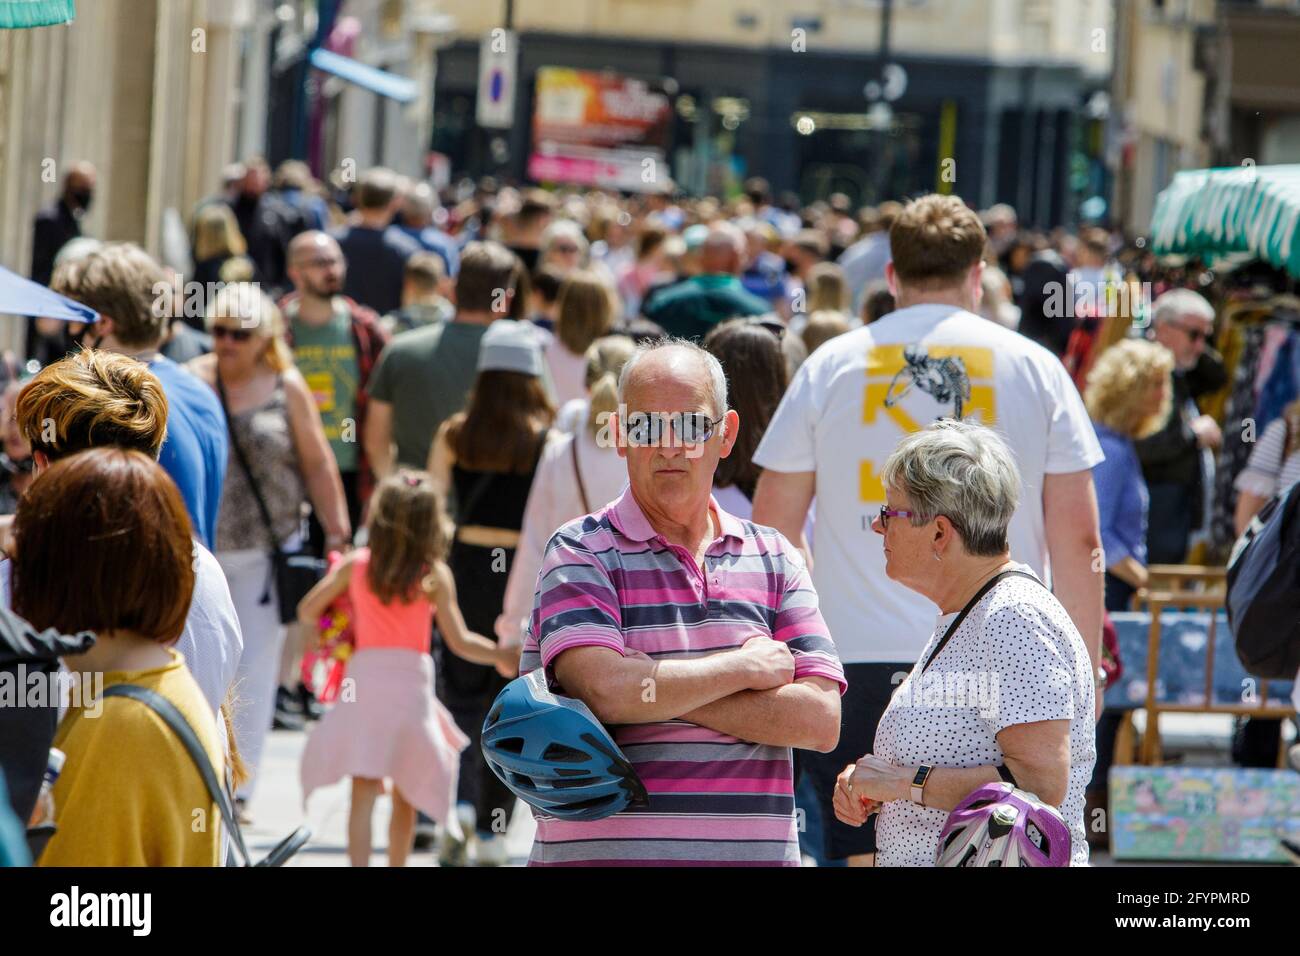 Bath, Somerset, UK. 29th May, 2021. Crowds of shoppers are pictured on the streets of Bath as people made the most of the bank holiday weekend sunshine. Credit: Lynchpics/Alamy Live News Stock Photo